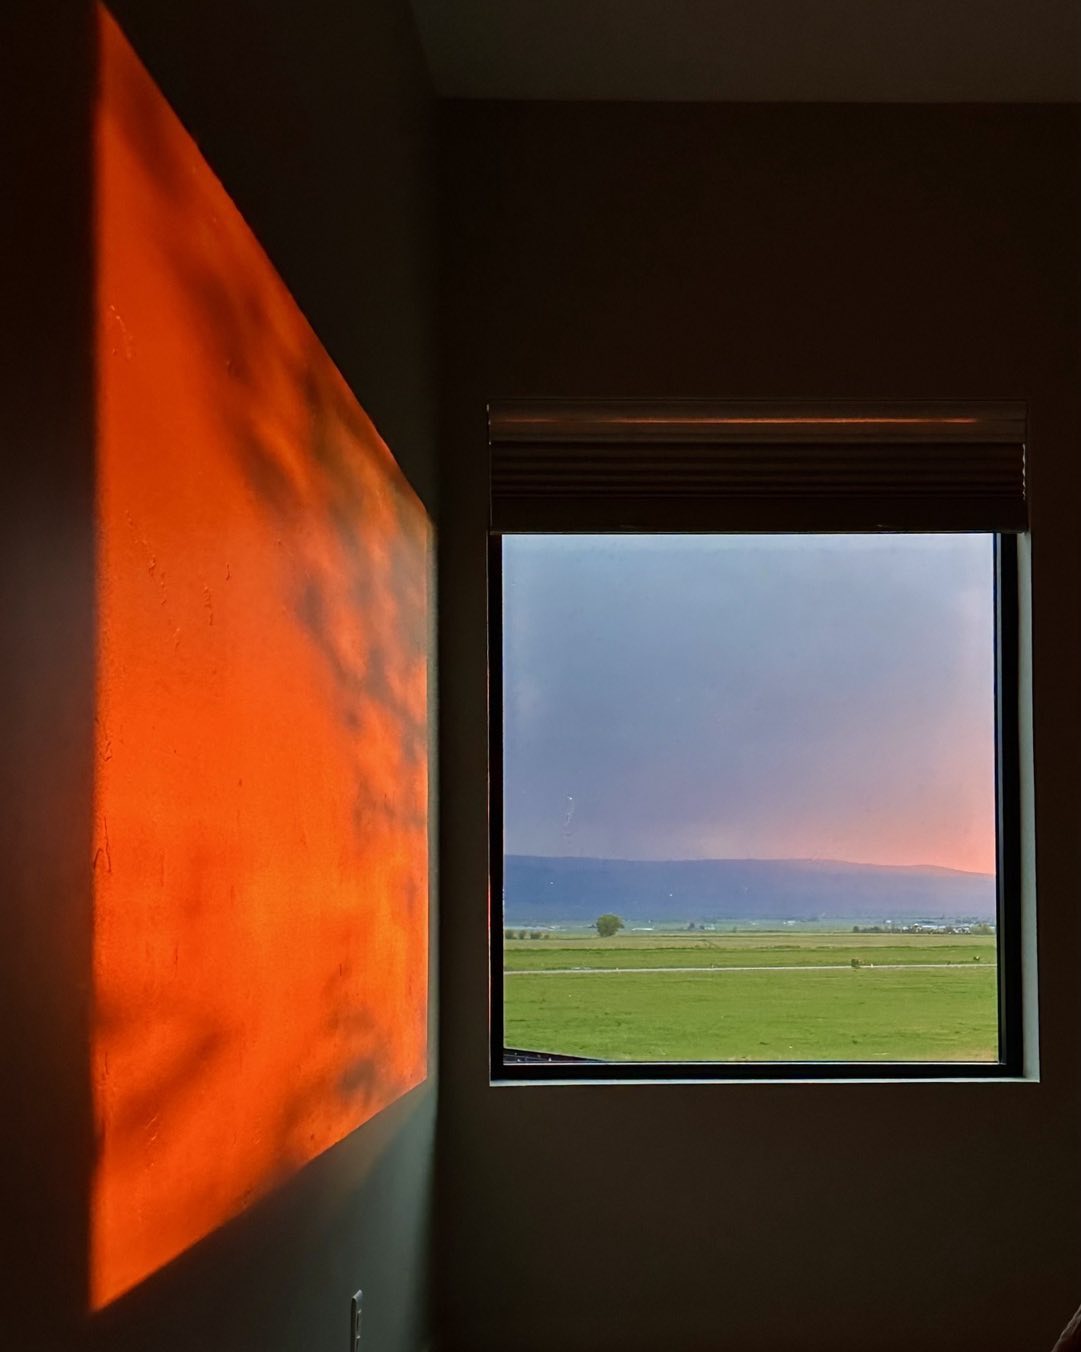 Sunset reflected on our bedroom wall this evening. A heavy cloud cover with just a sliver of clearing on the horizon at sunset created this artistic composition. It lasted for a few minutes! #tetonvalleyidaho #driggsidaho #bestofthegemstate #idahosunsets